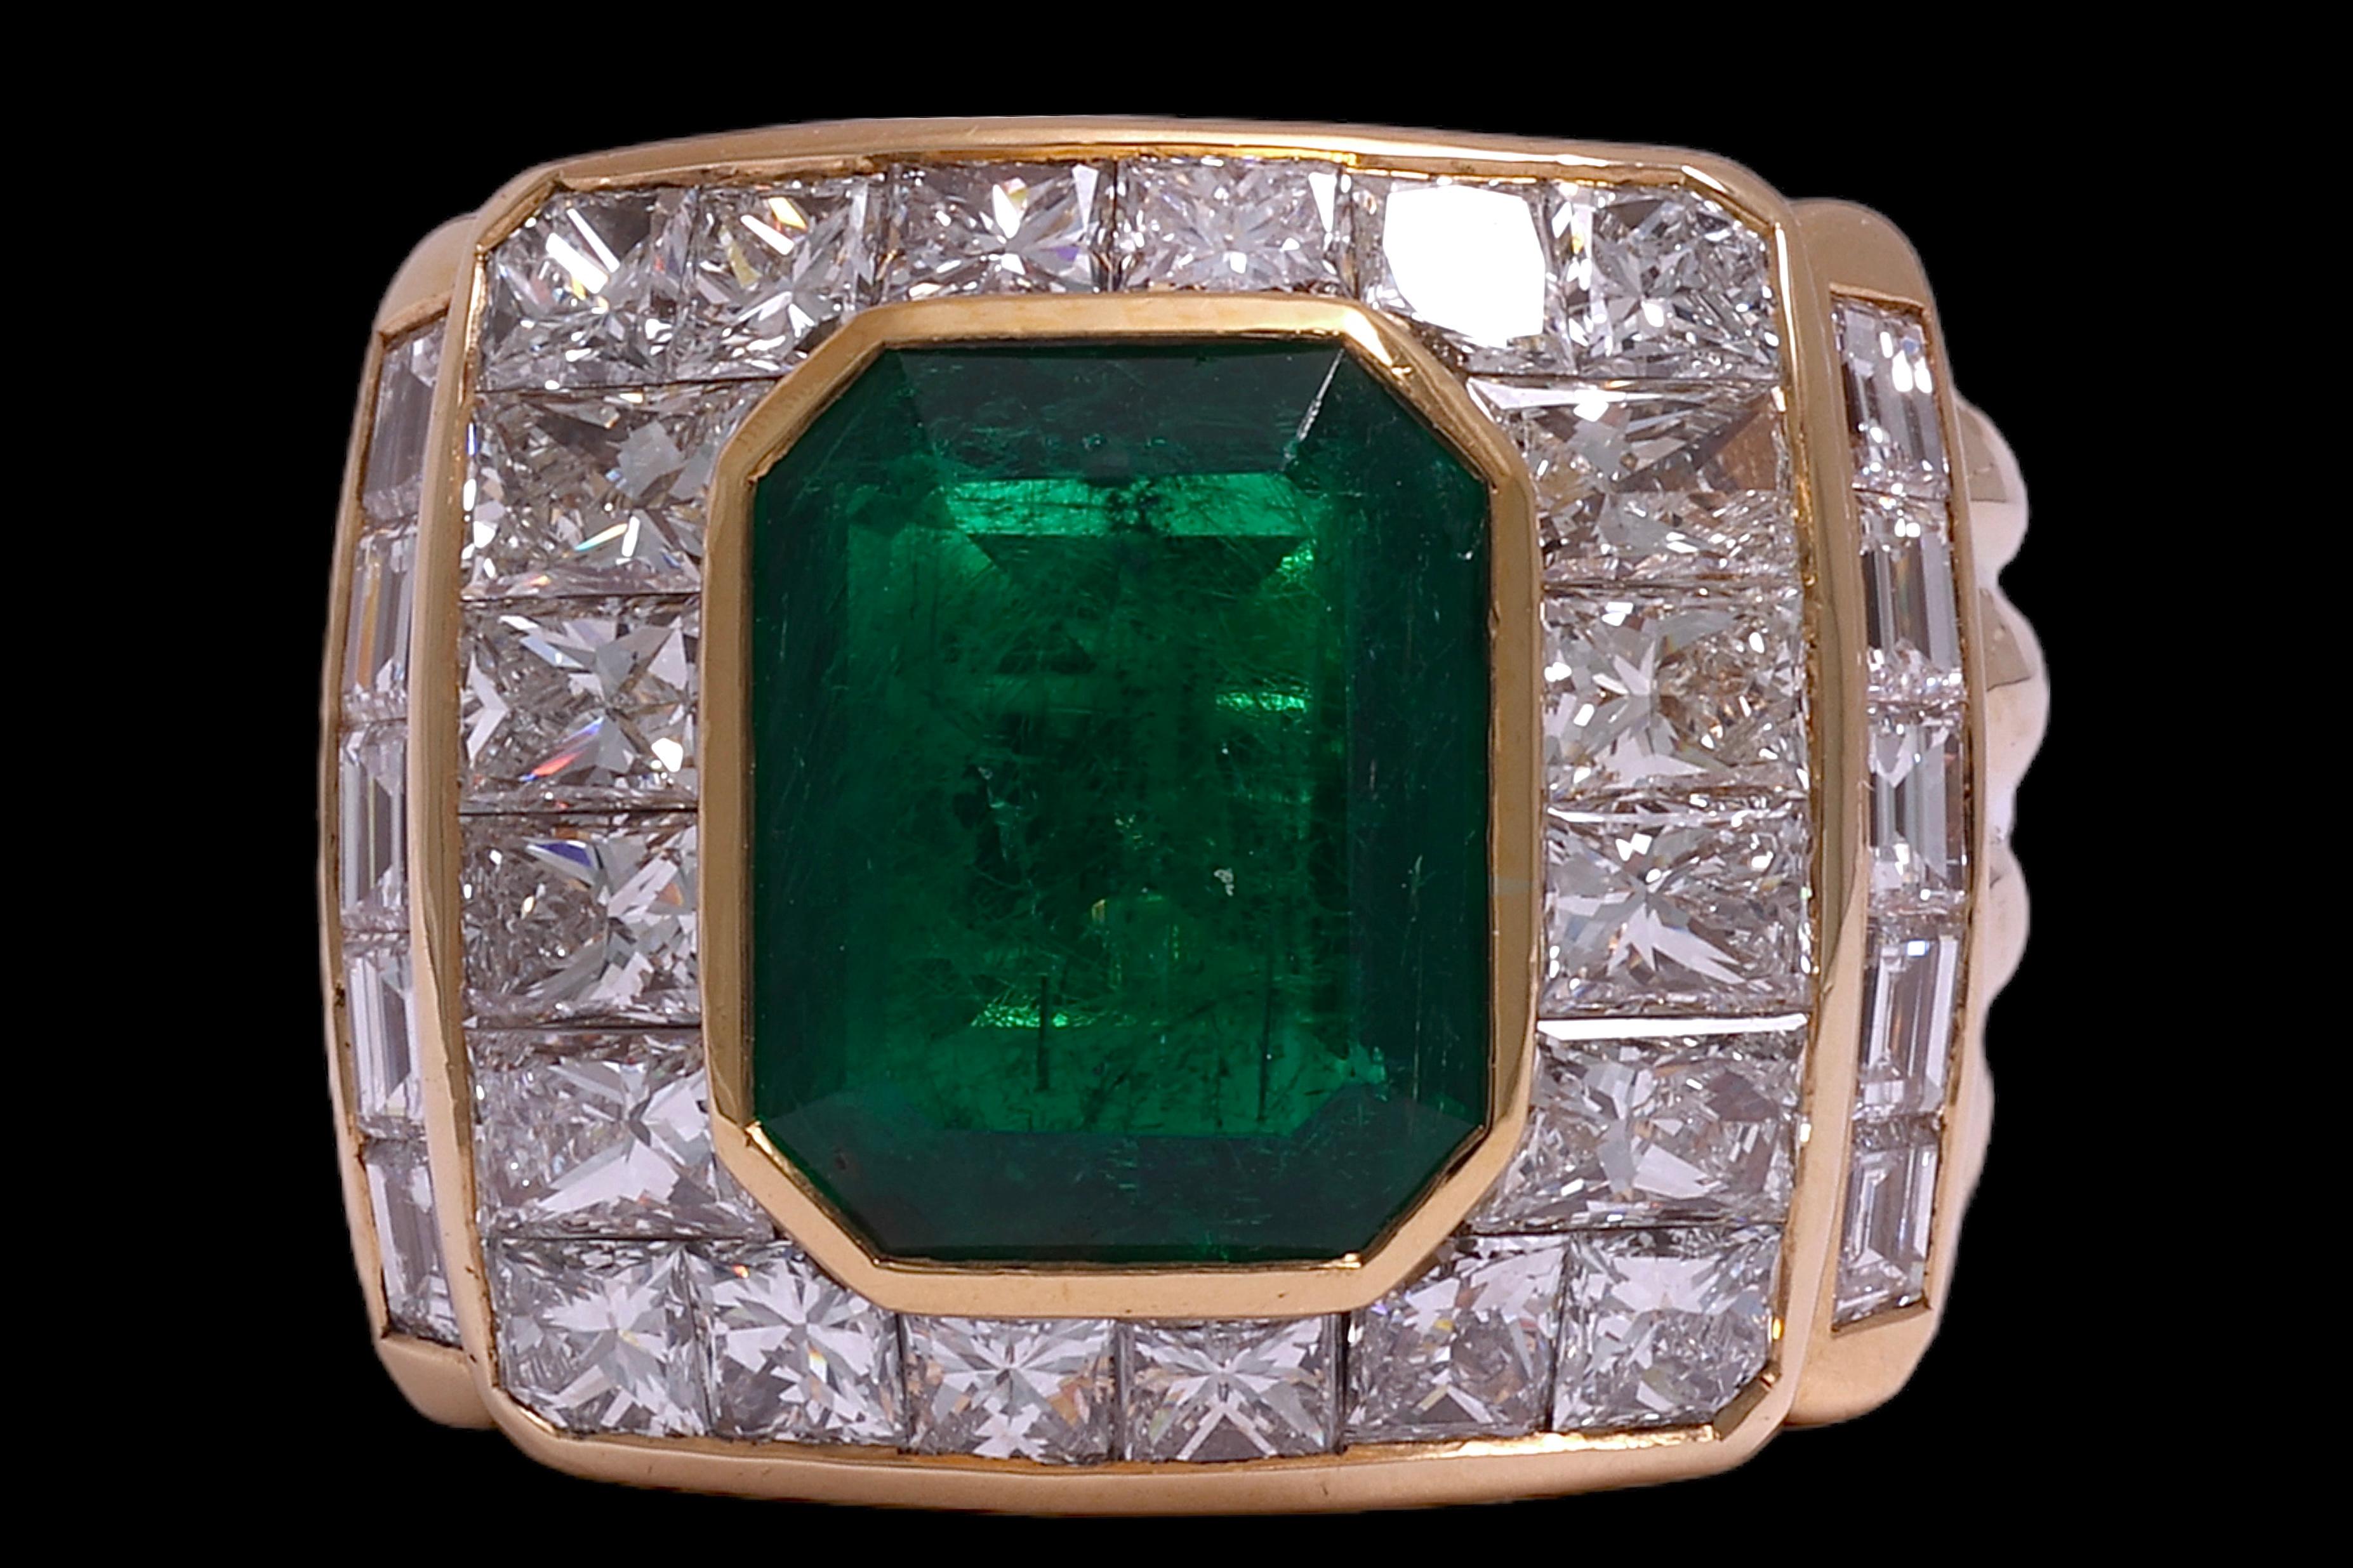 Gorgeous 18 kt. Yellow Gold Ring With 2.3 ct. Himalayan Mountains RARE Emerald & 3.24 ct. Diamonds With GRS Certificate from Estate Sultan of Oman Qaboos Bin Said.

Extremely rare Emerald from The Himalayan Mountains, Afghanistan

Emerald: Natural,